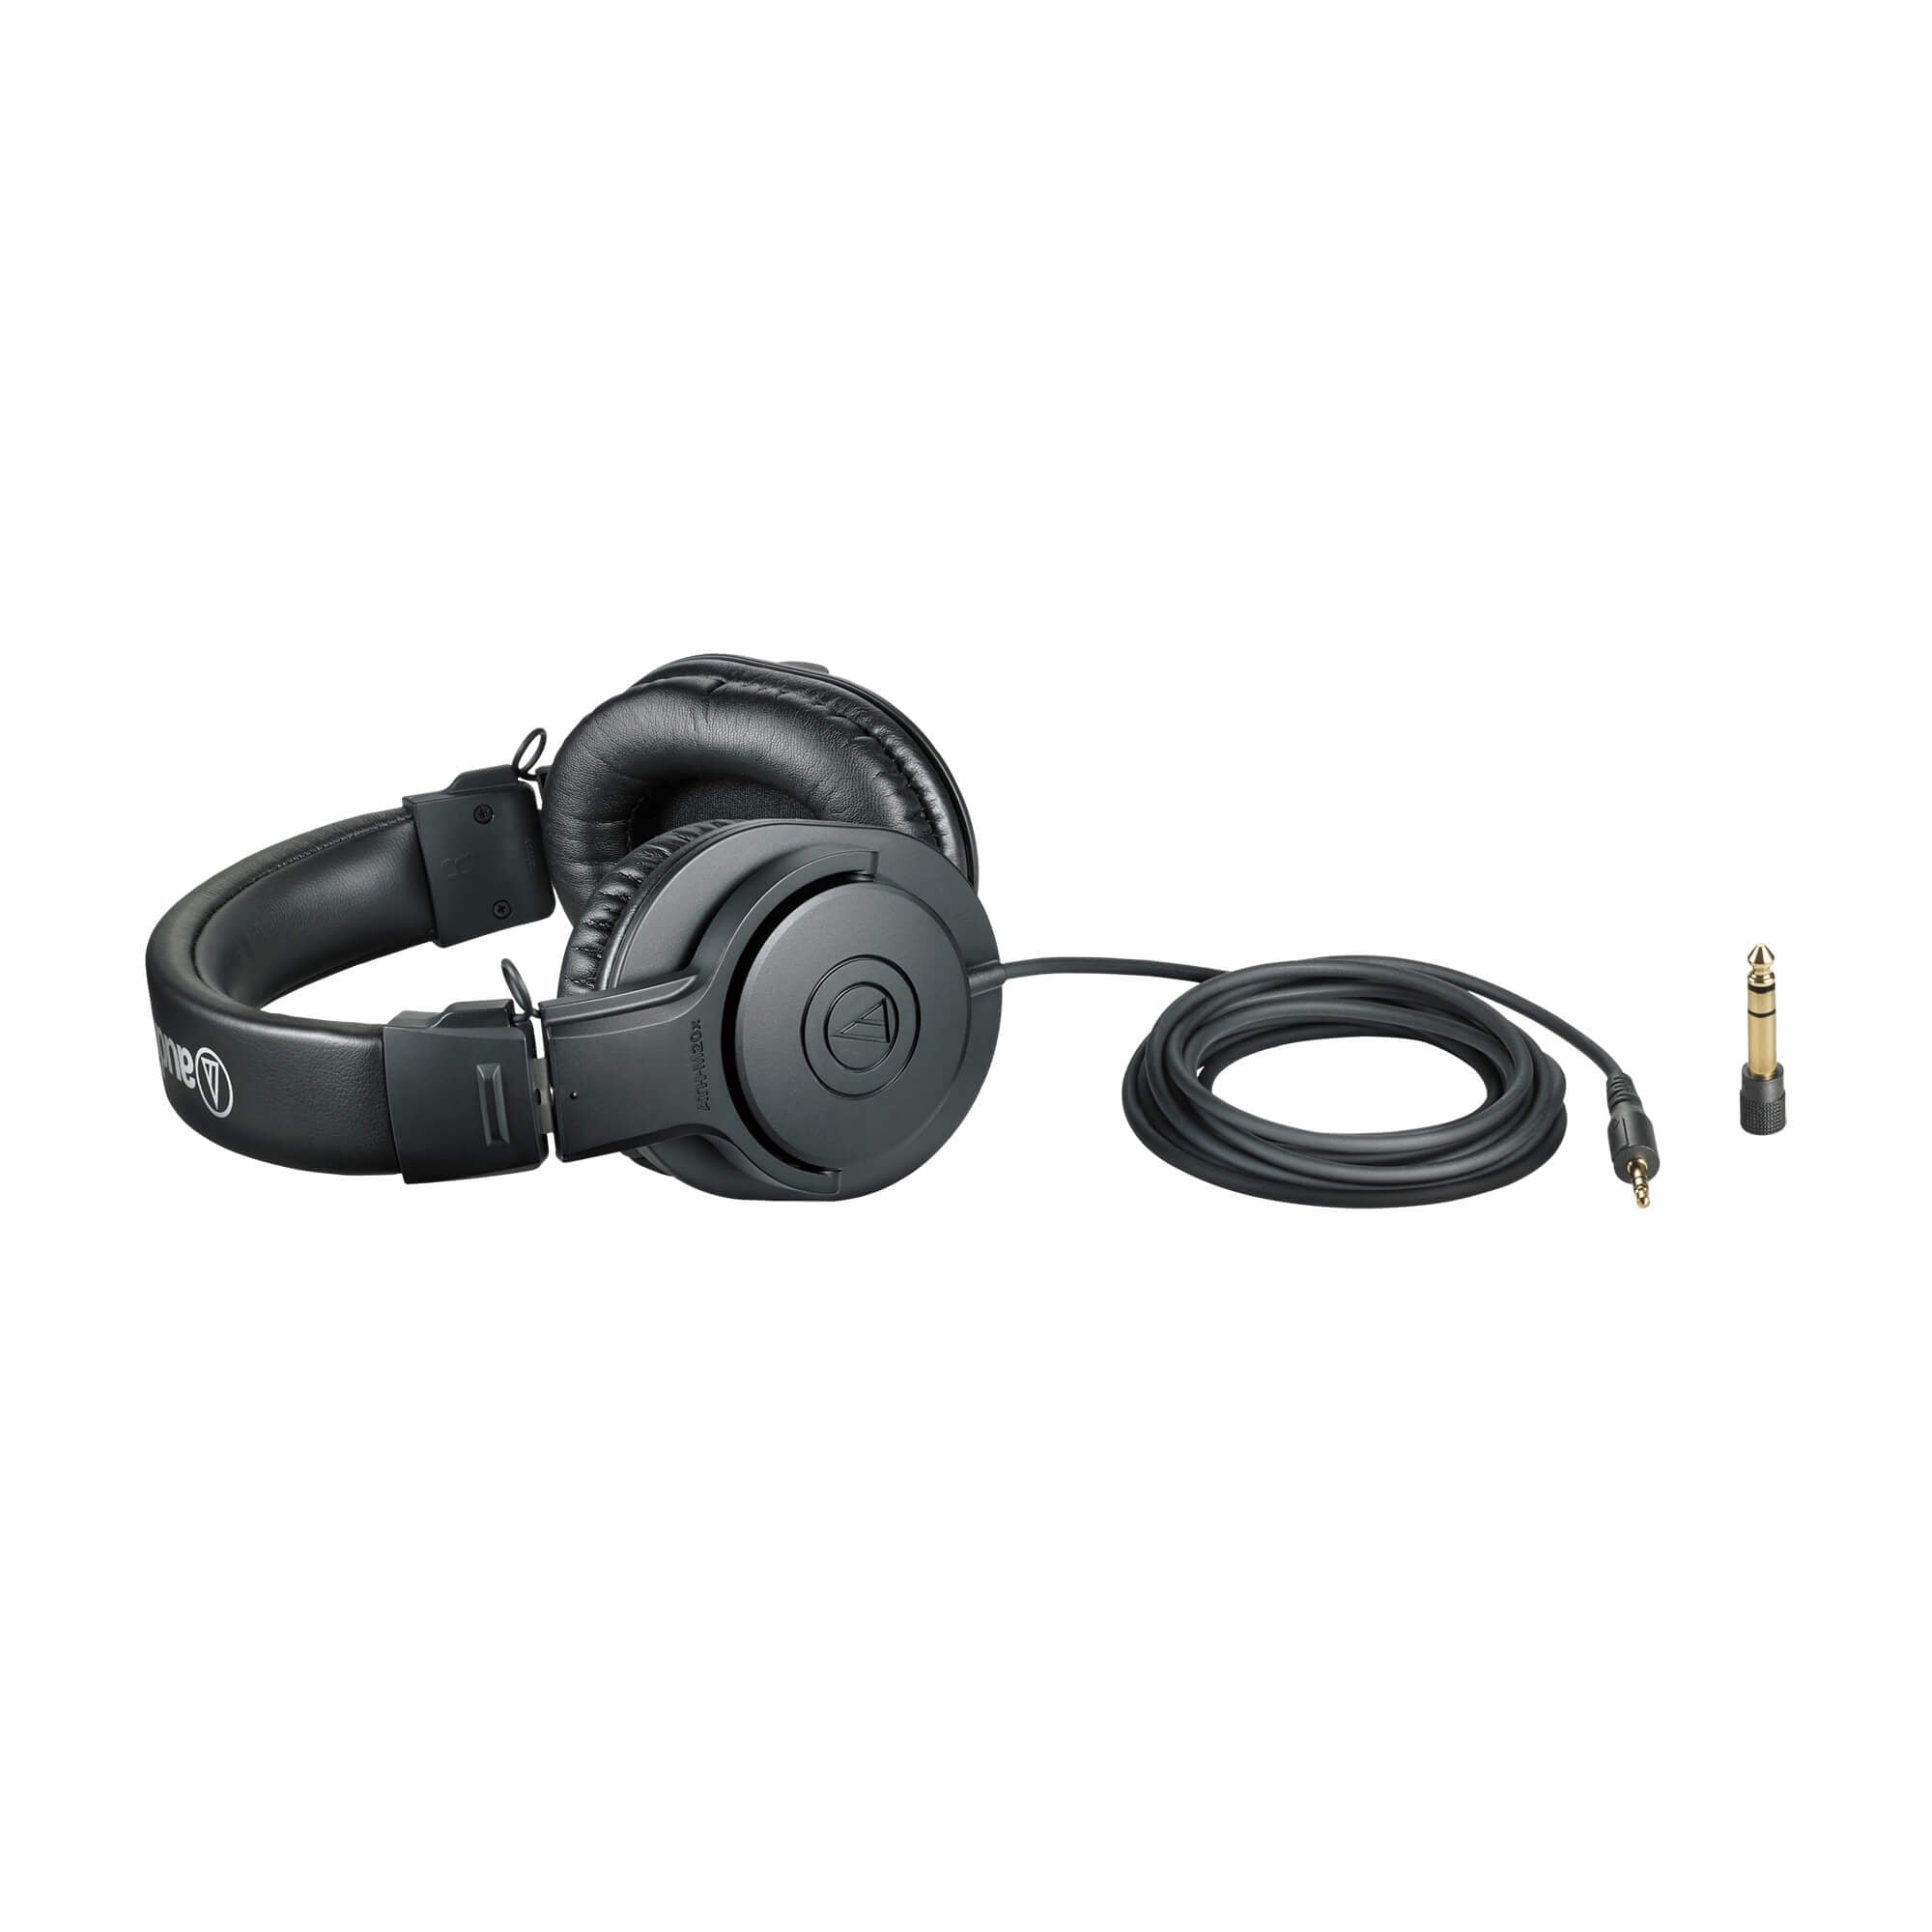 Audio-Technica ATH-M20x Professional Monitor Headphones with 1/4" adapter plug